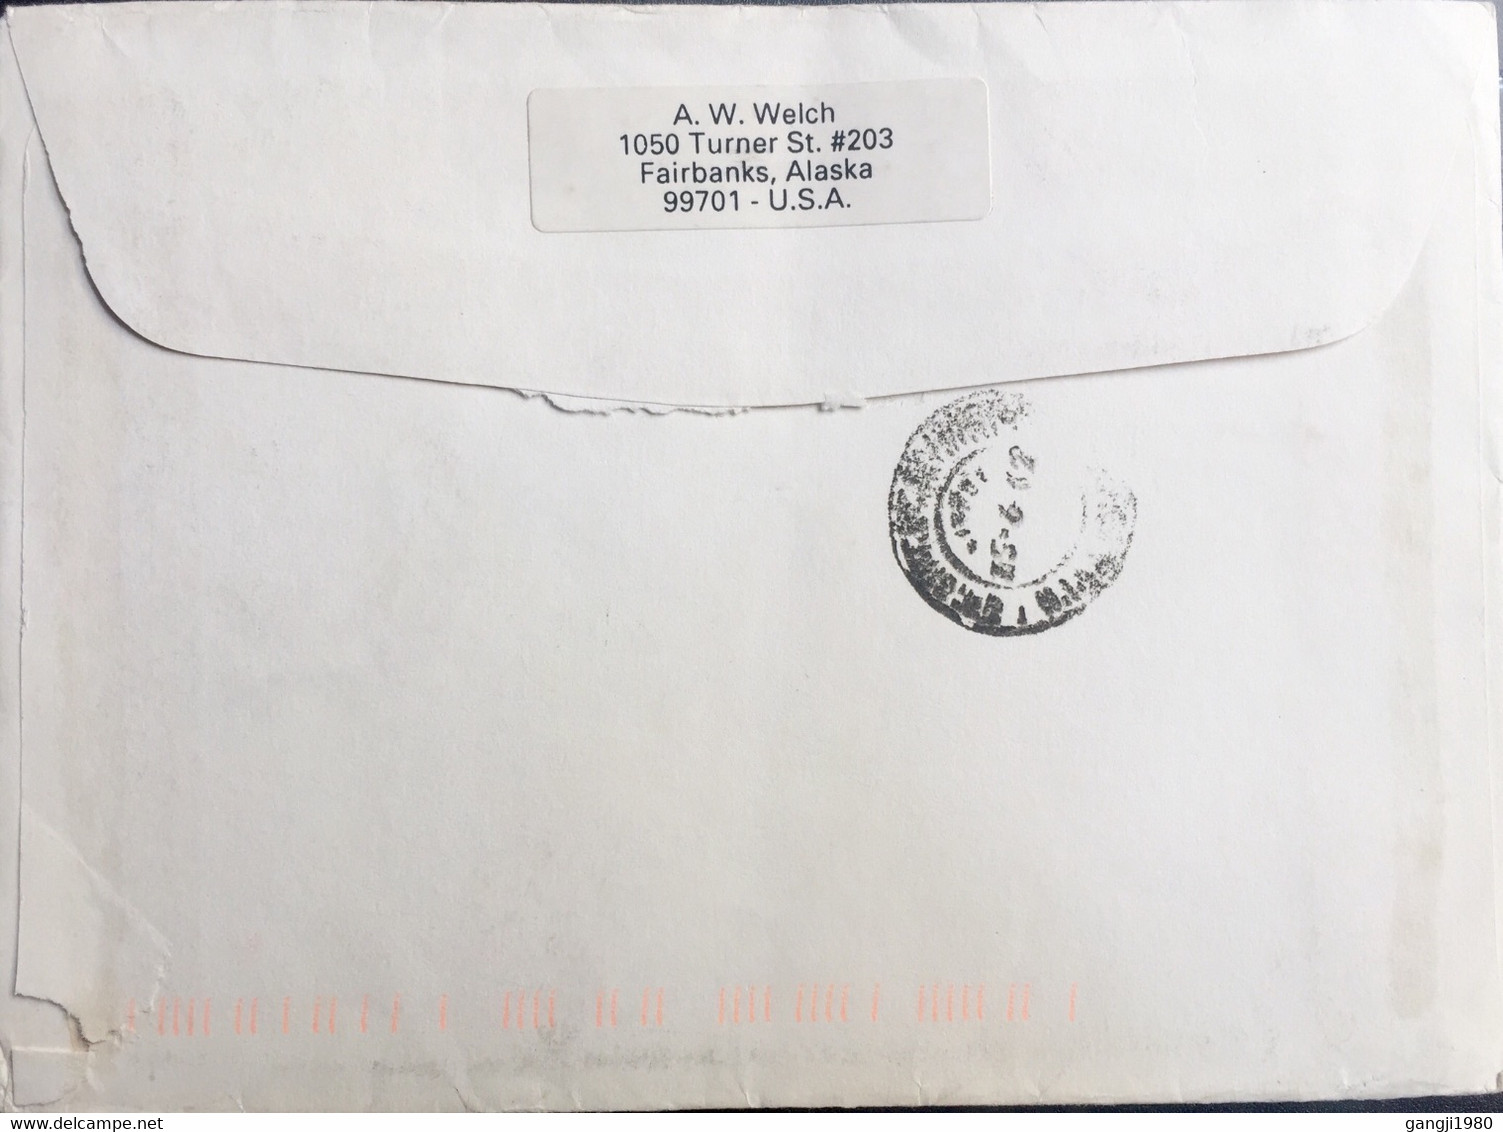 UNITED NATION 2002, USED COVER TO INDIA,HELPING HEART HANDS STAMPS NEW YORK CANCELLATION - Lettres & Documents